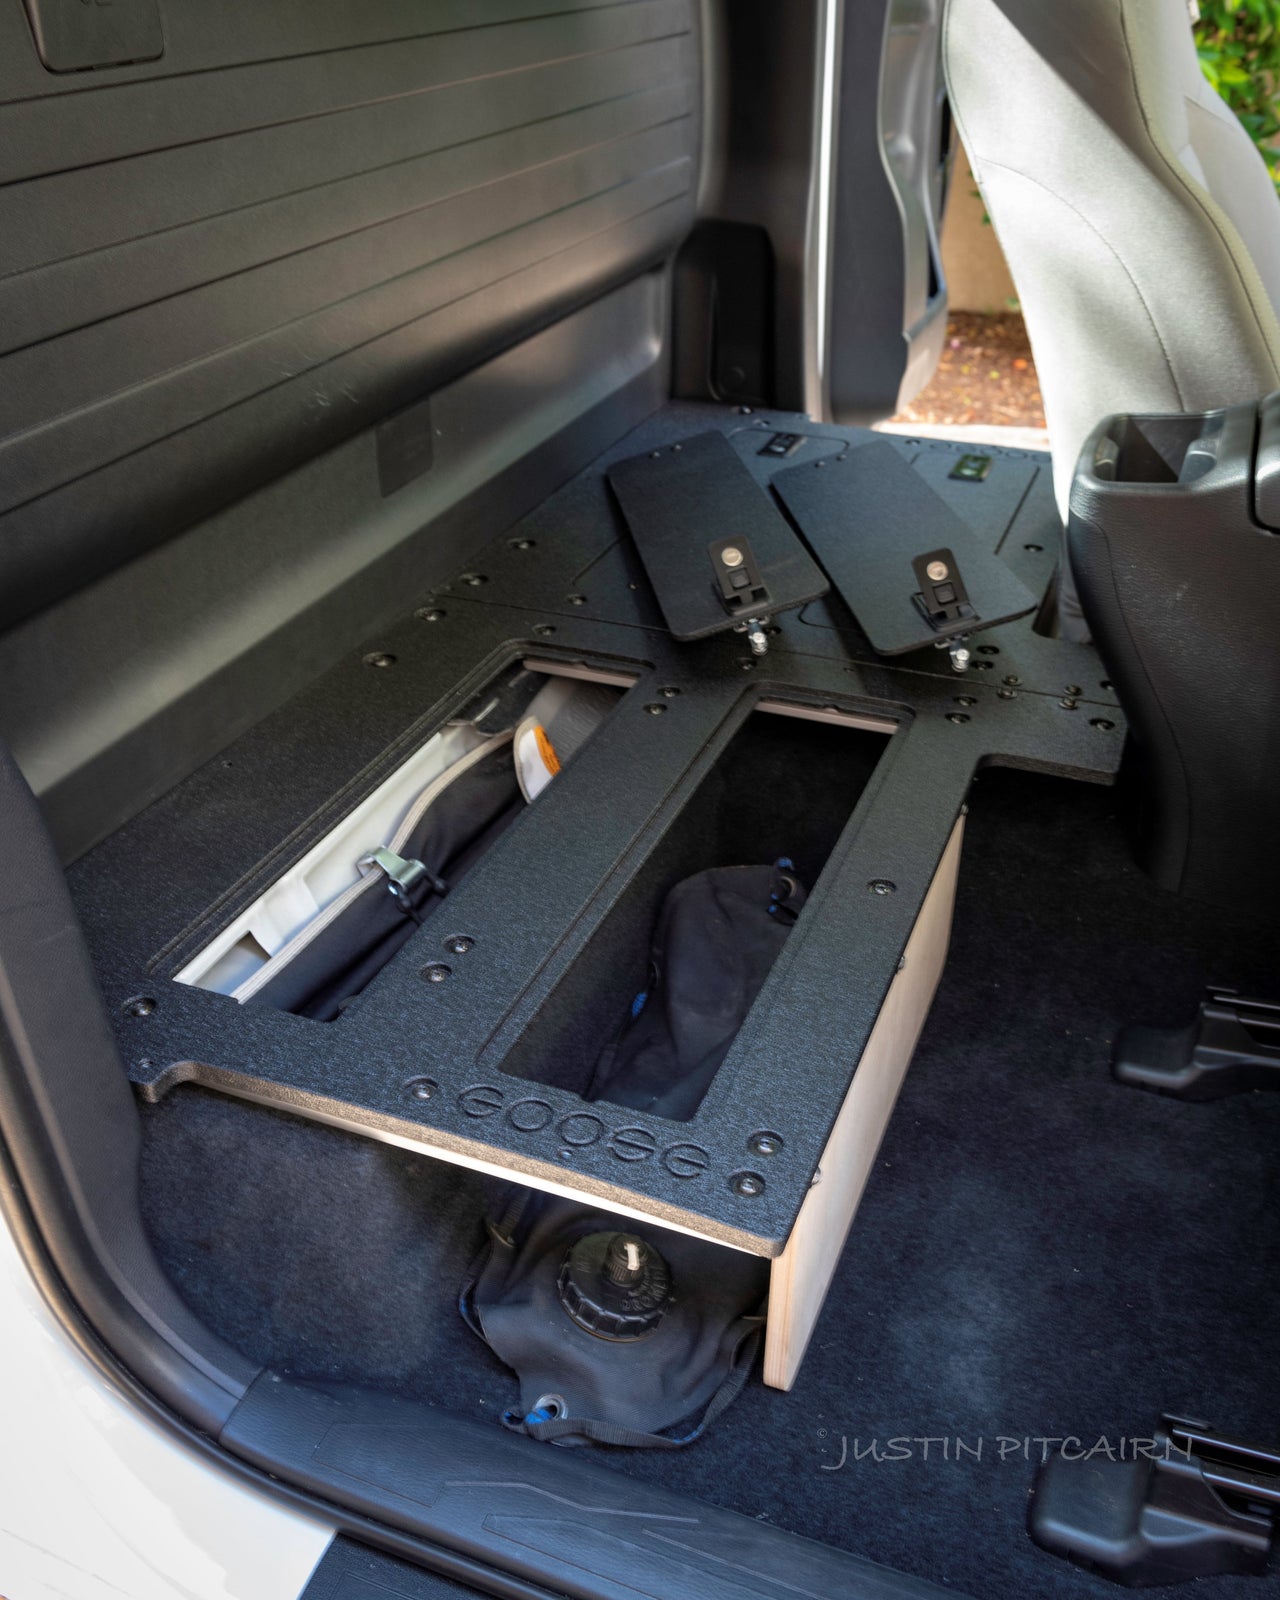 GOOSE GEAR Toyota Tacoma 2016-Present 3rd Gen. Access Cab without Factory Seats - Second Row Seat Delete Plate System